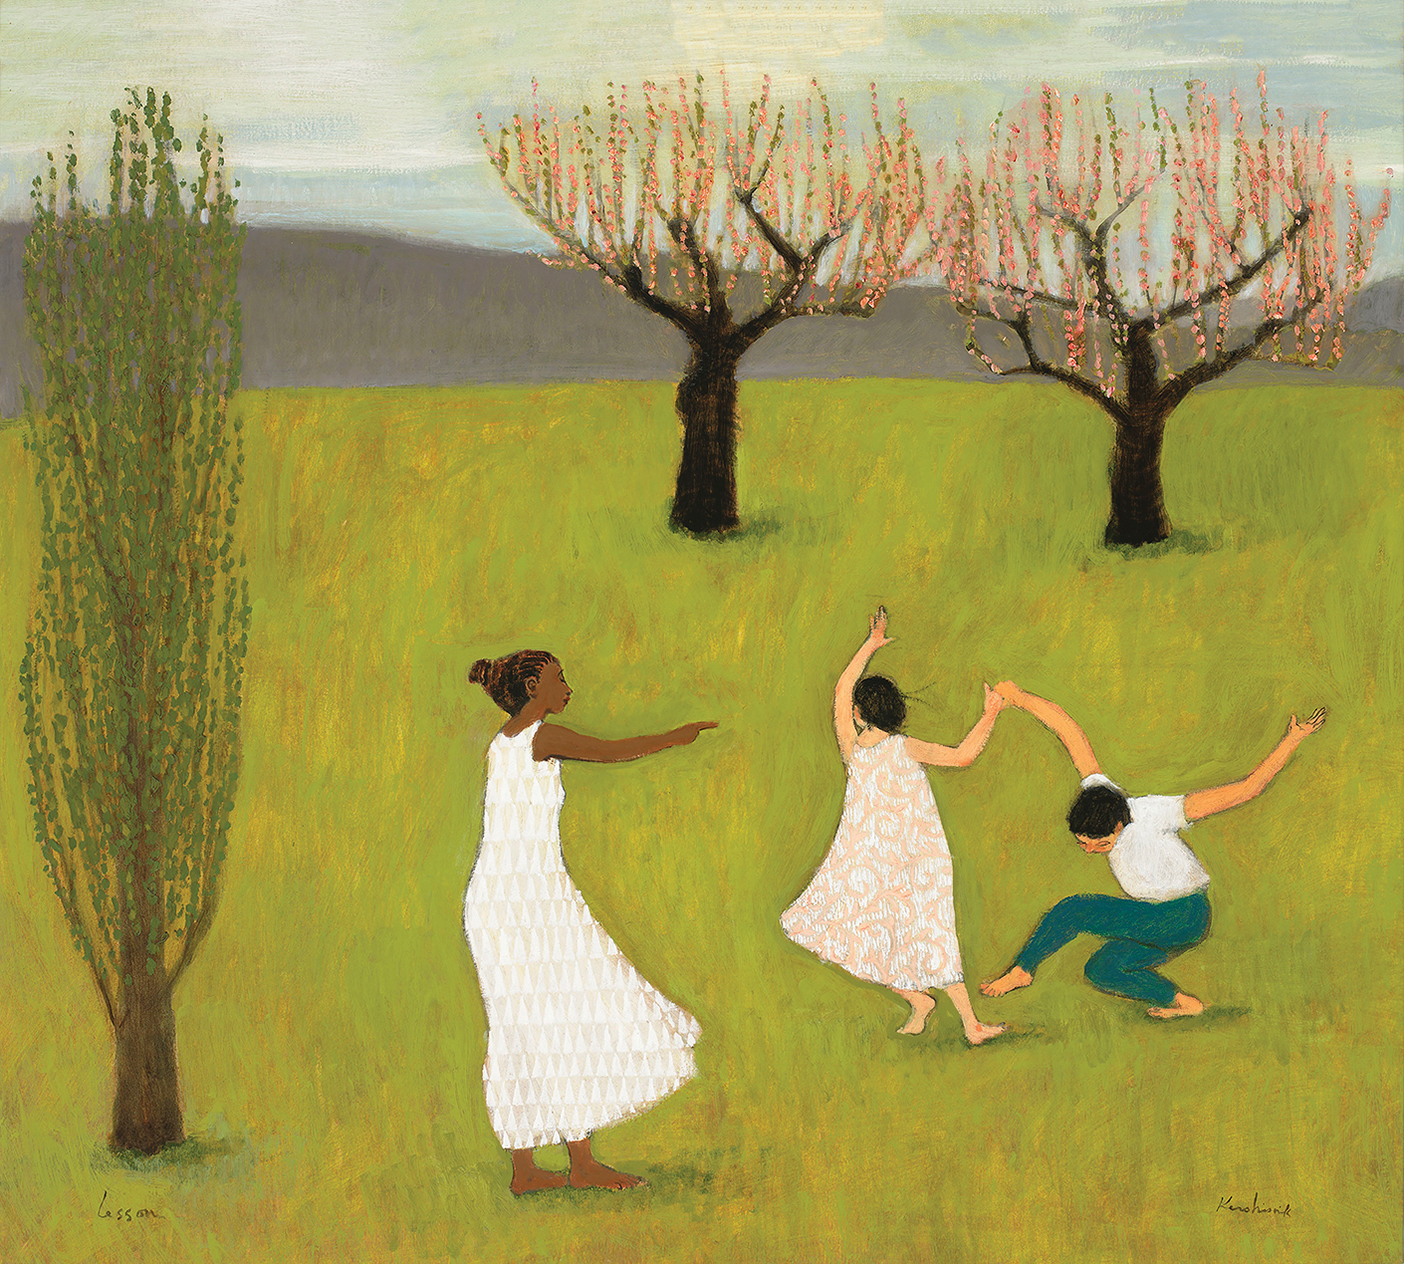 A painting of three people dancing in a field.